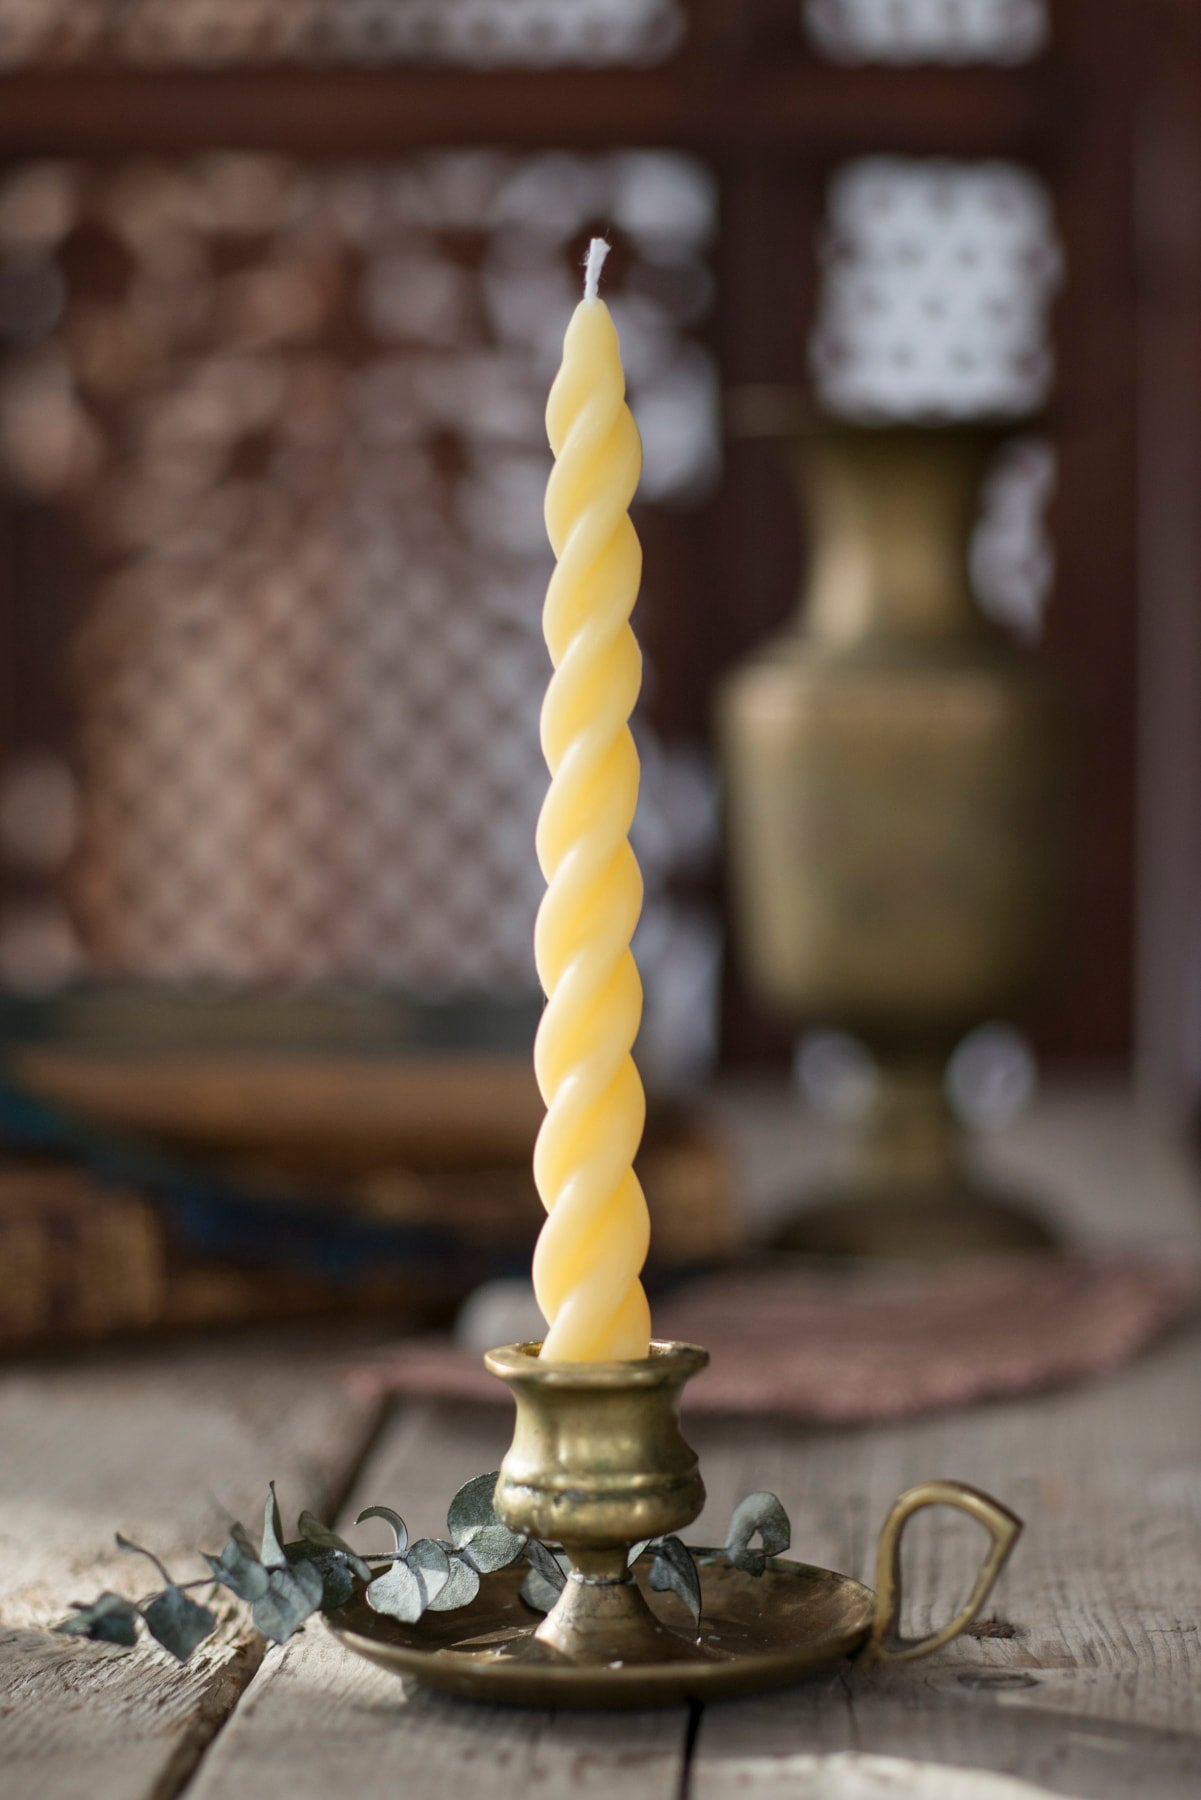 Double Spiral Beeswax Taper Candles - 7/8 x 12 - Pair - Crafted Candles